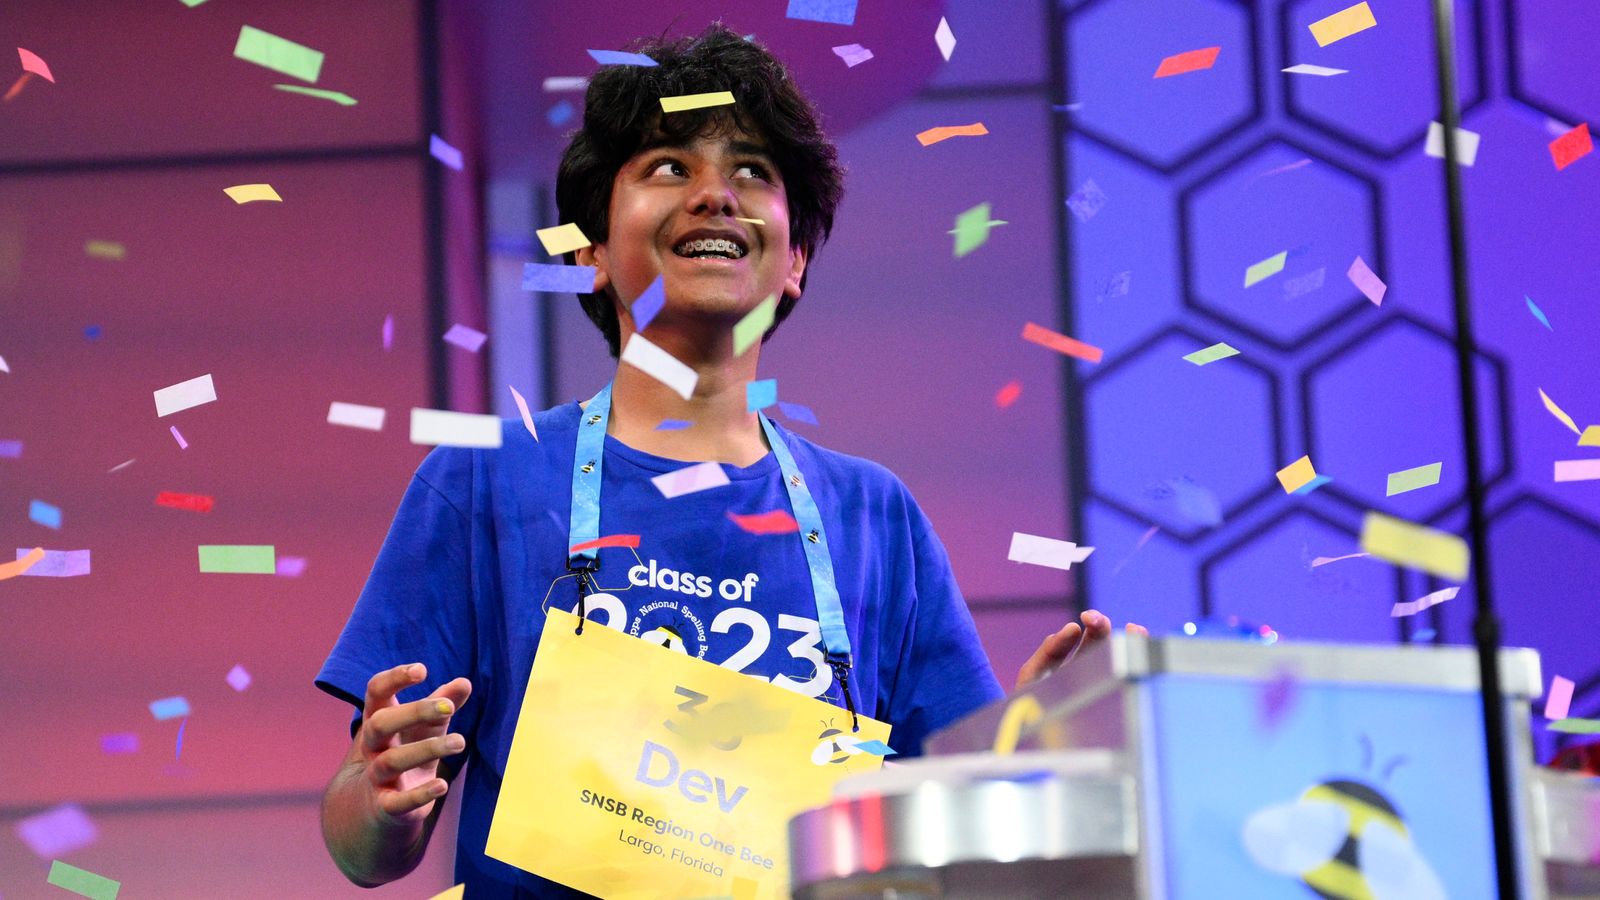 Dev Shah, 14, has won the Scripps National Spelling Bee finals. Pic: AP